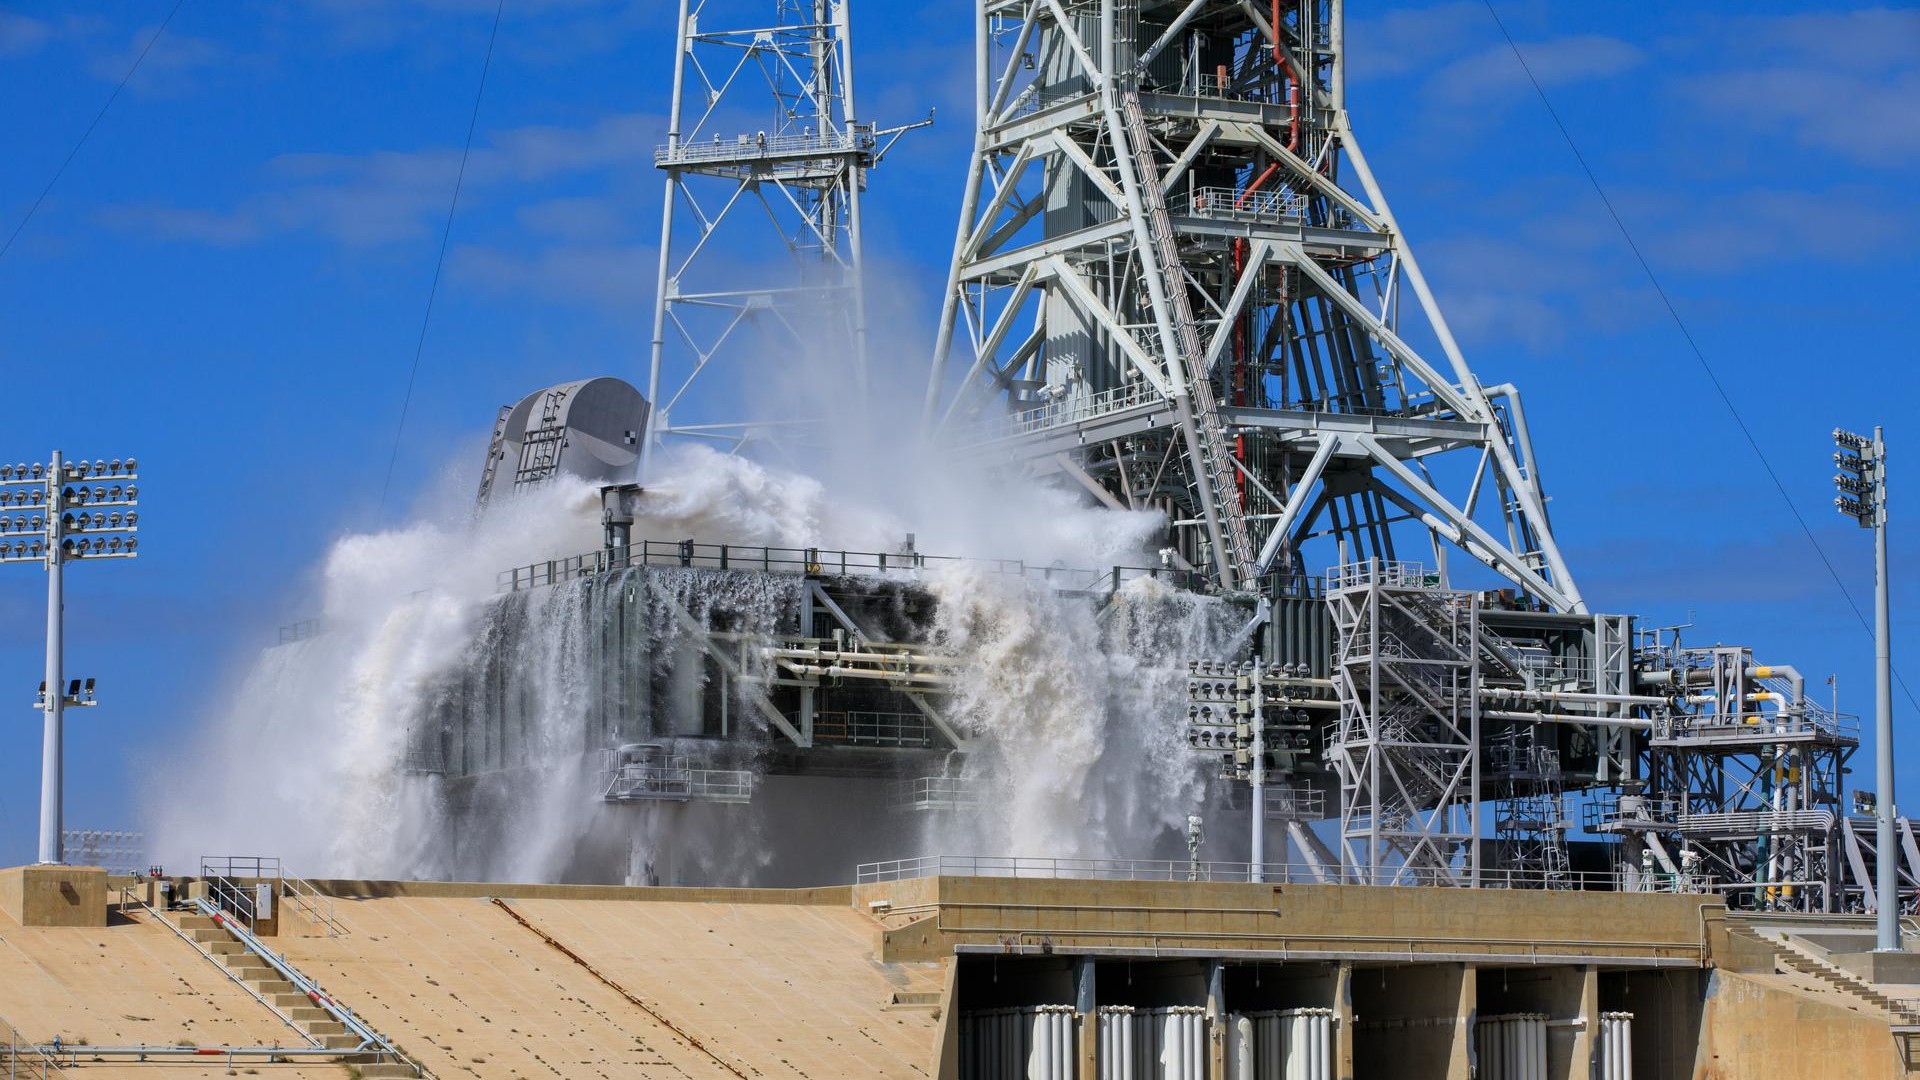 water splashes and froths at the base of a large metal tower